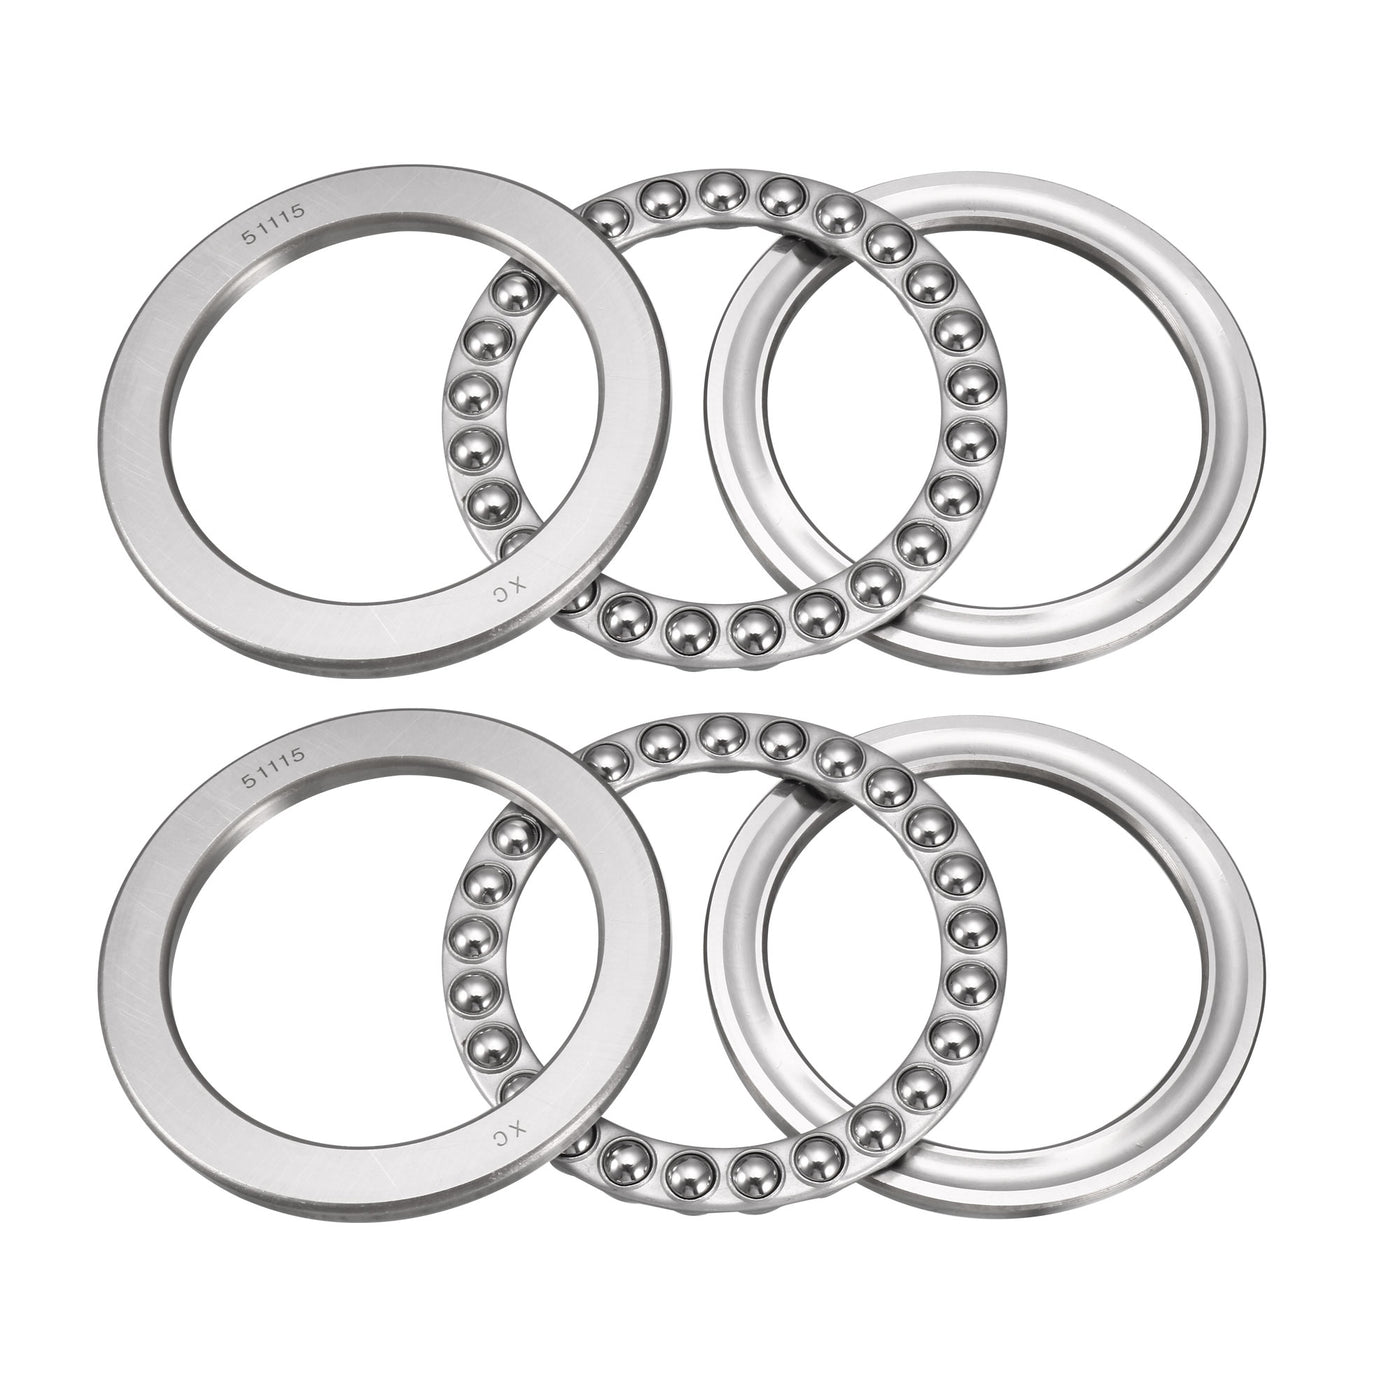 uxcell Uxcell 51115 Miniature Thrust Ball Bearing 75x100x19mm Chrome Steel with Washer 2pcs